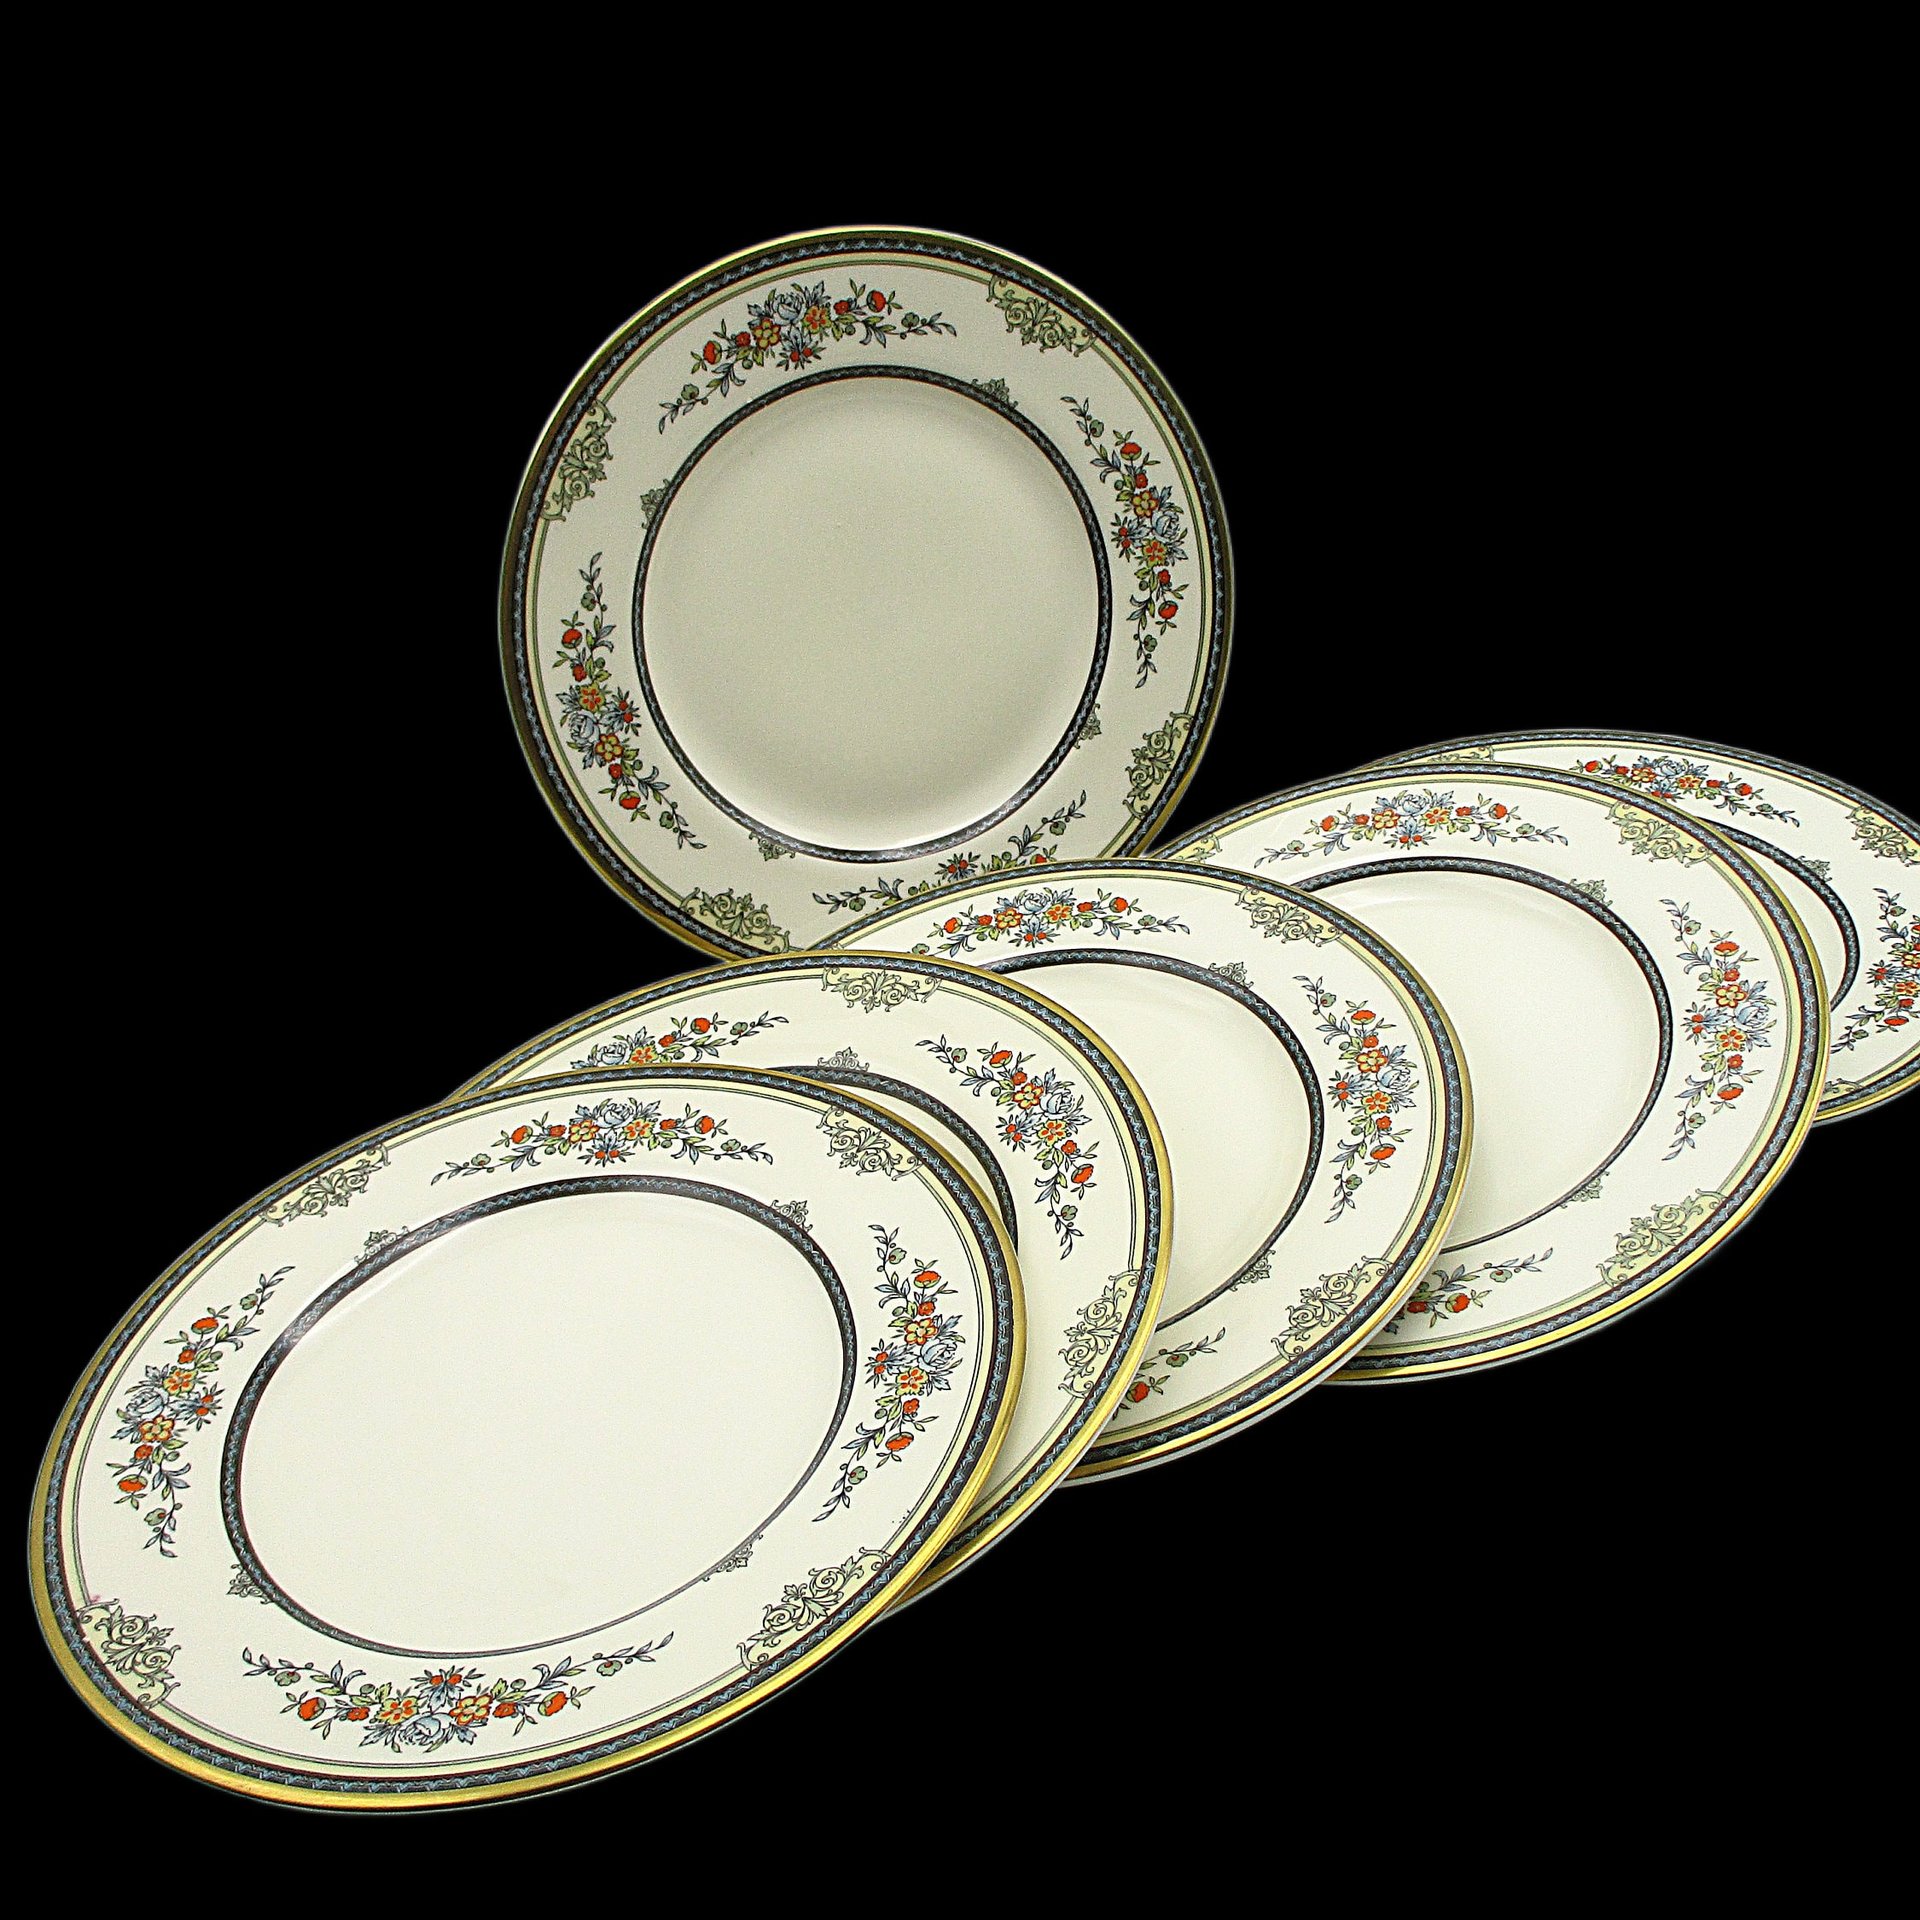 Minton Stanwood Bread Dessert Plates, Sets of 6 or Set of 5, Your Choice, Fall Colors, Excellent Condition, Made in England